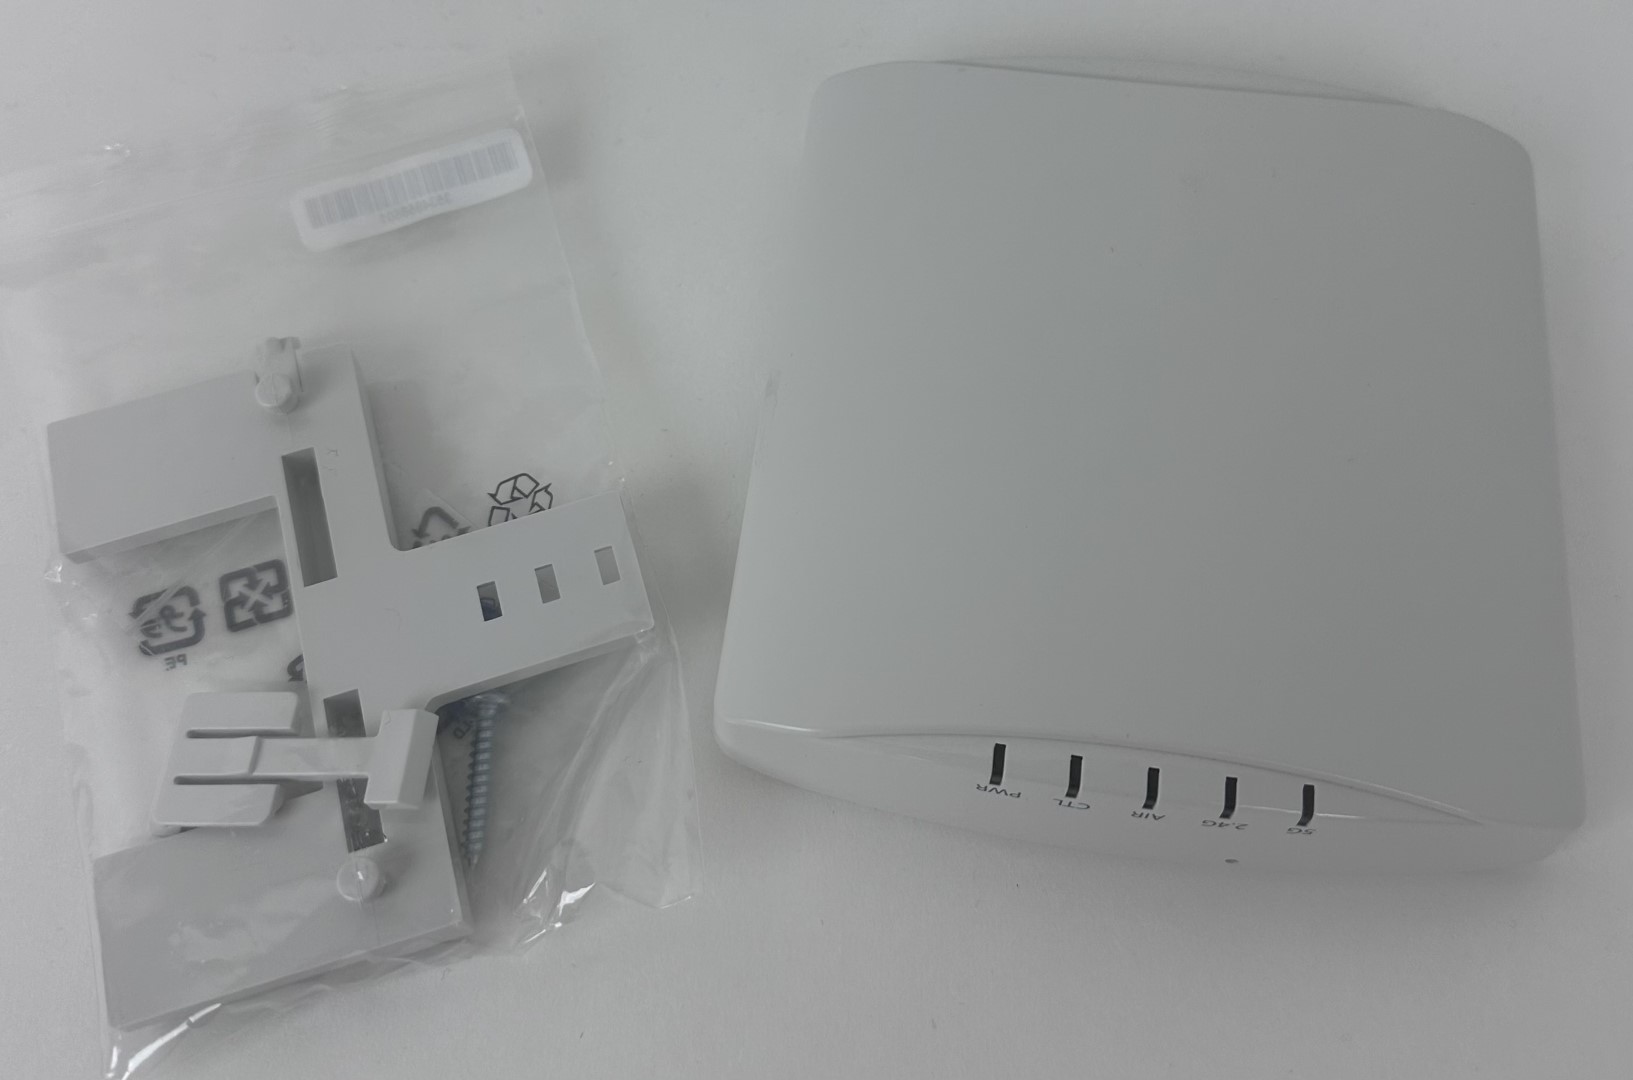 Access Networks A320 Wireless Access Point U